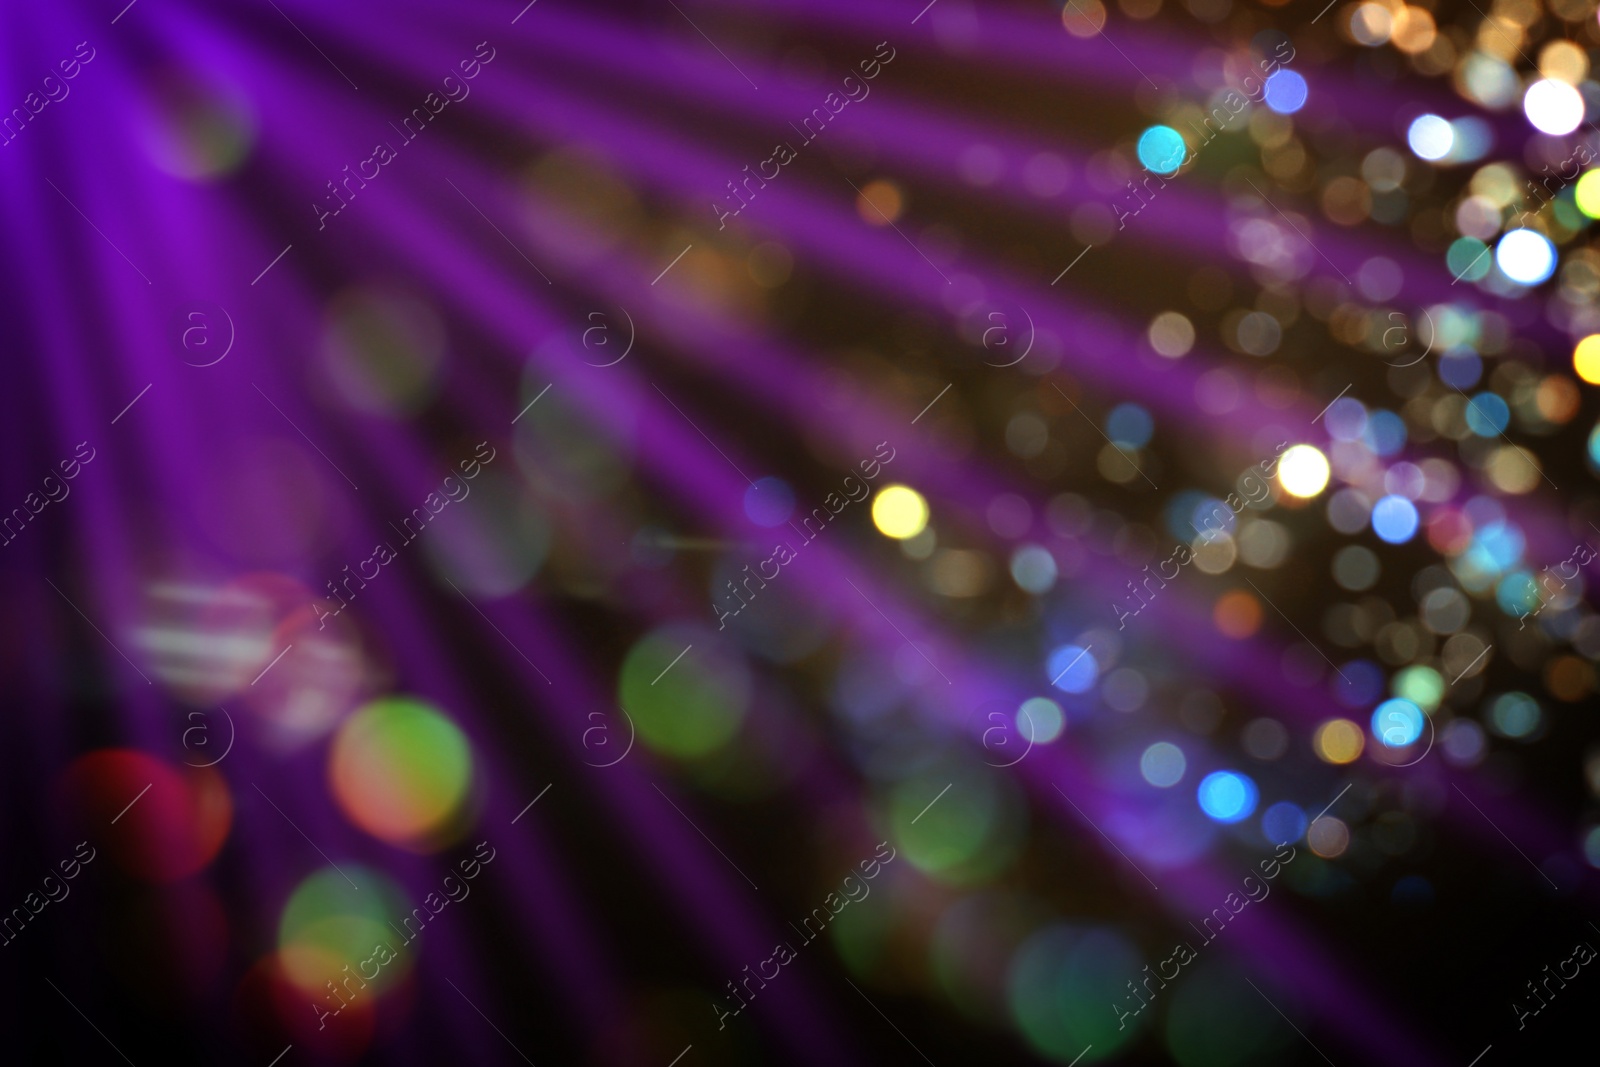 Image of Beams of light in darkness of night club, bokeh effect